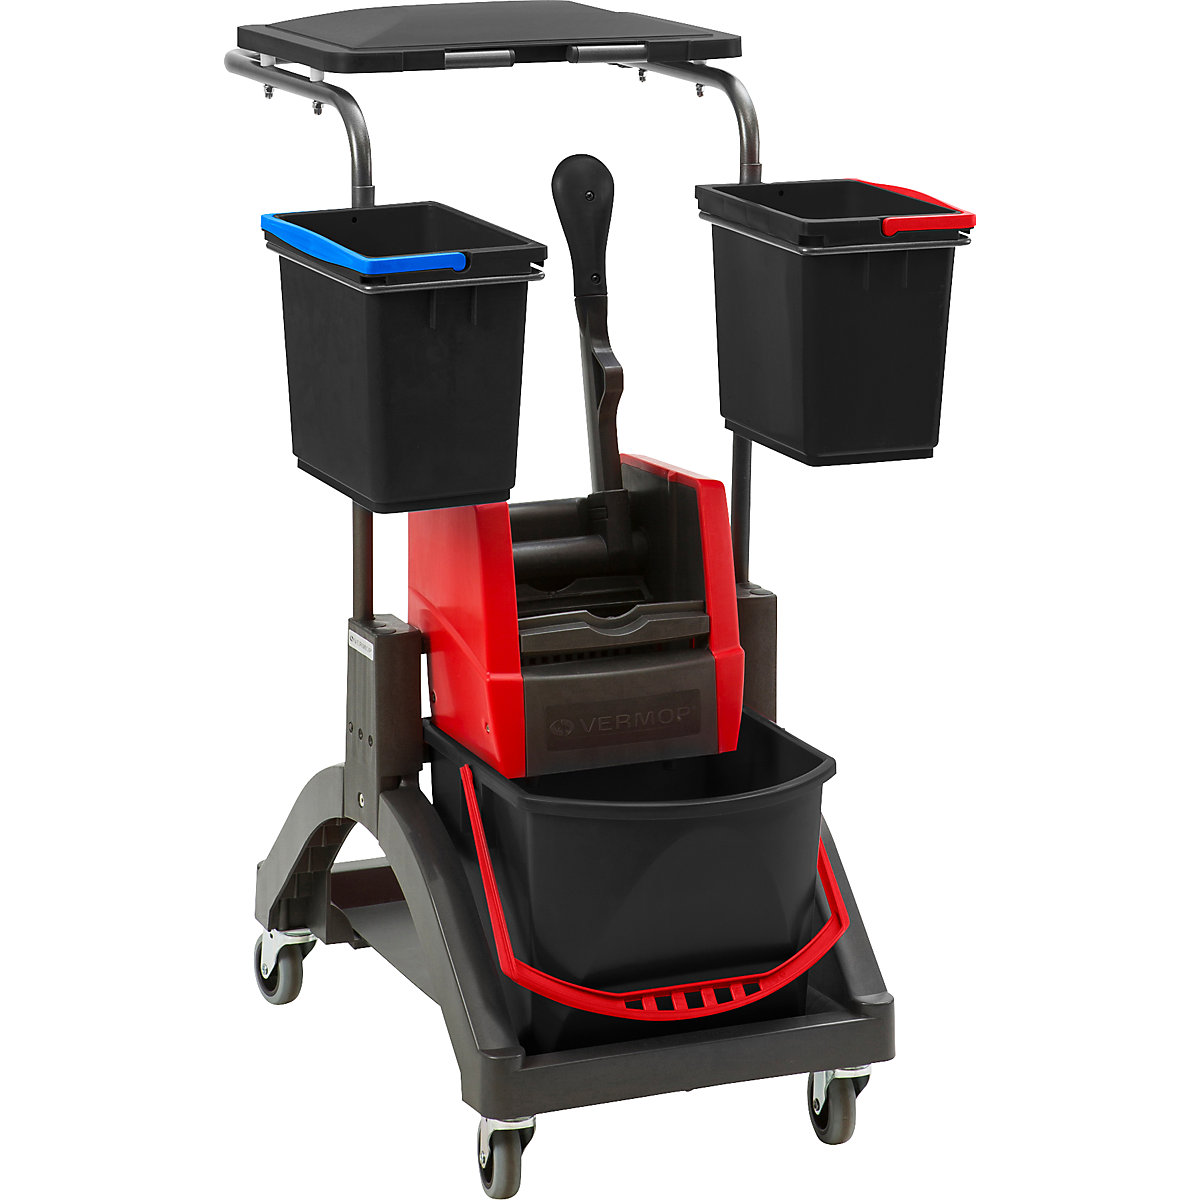 MISTRAL cleaning trolley - Vermop